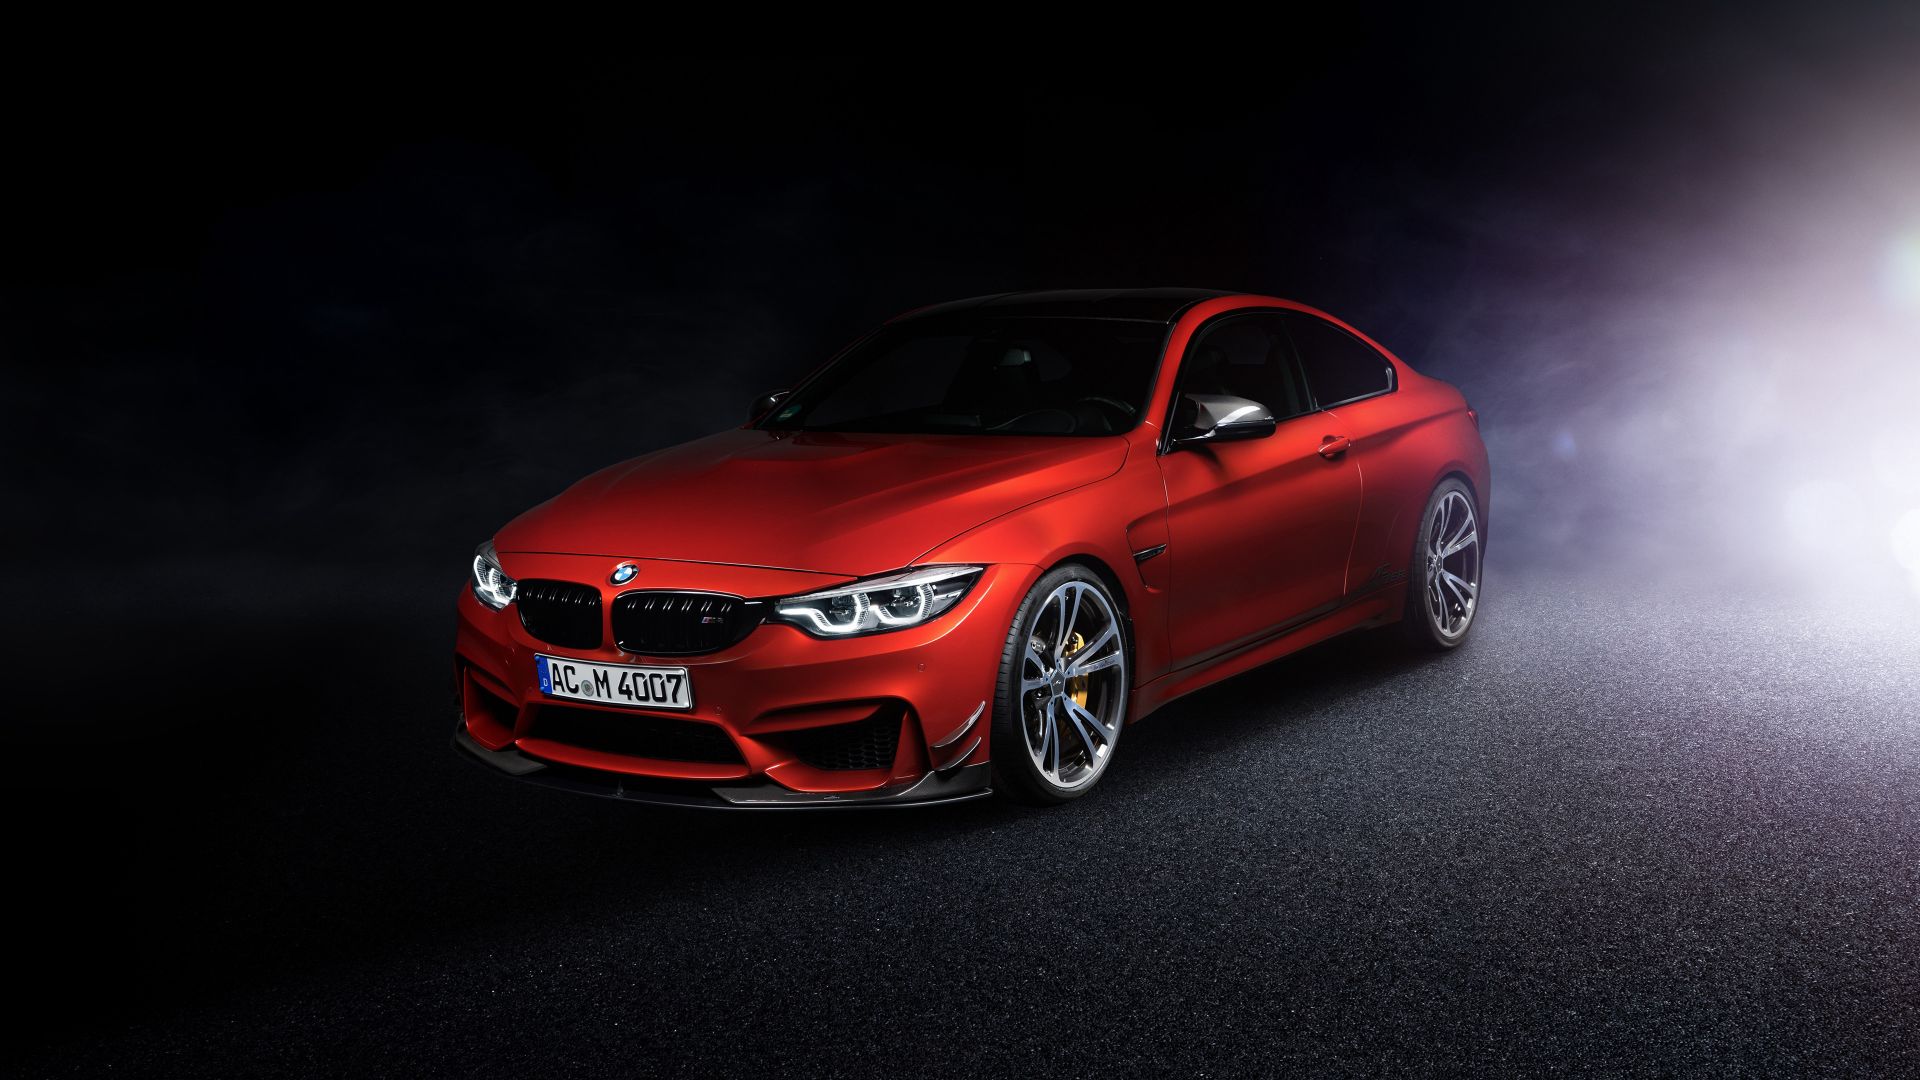 Wallpaper Ac schnitzer's bmw M4 coupe, red car, 2017, 4k